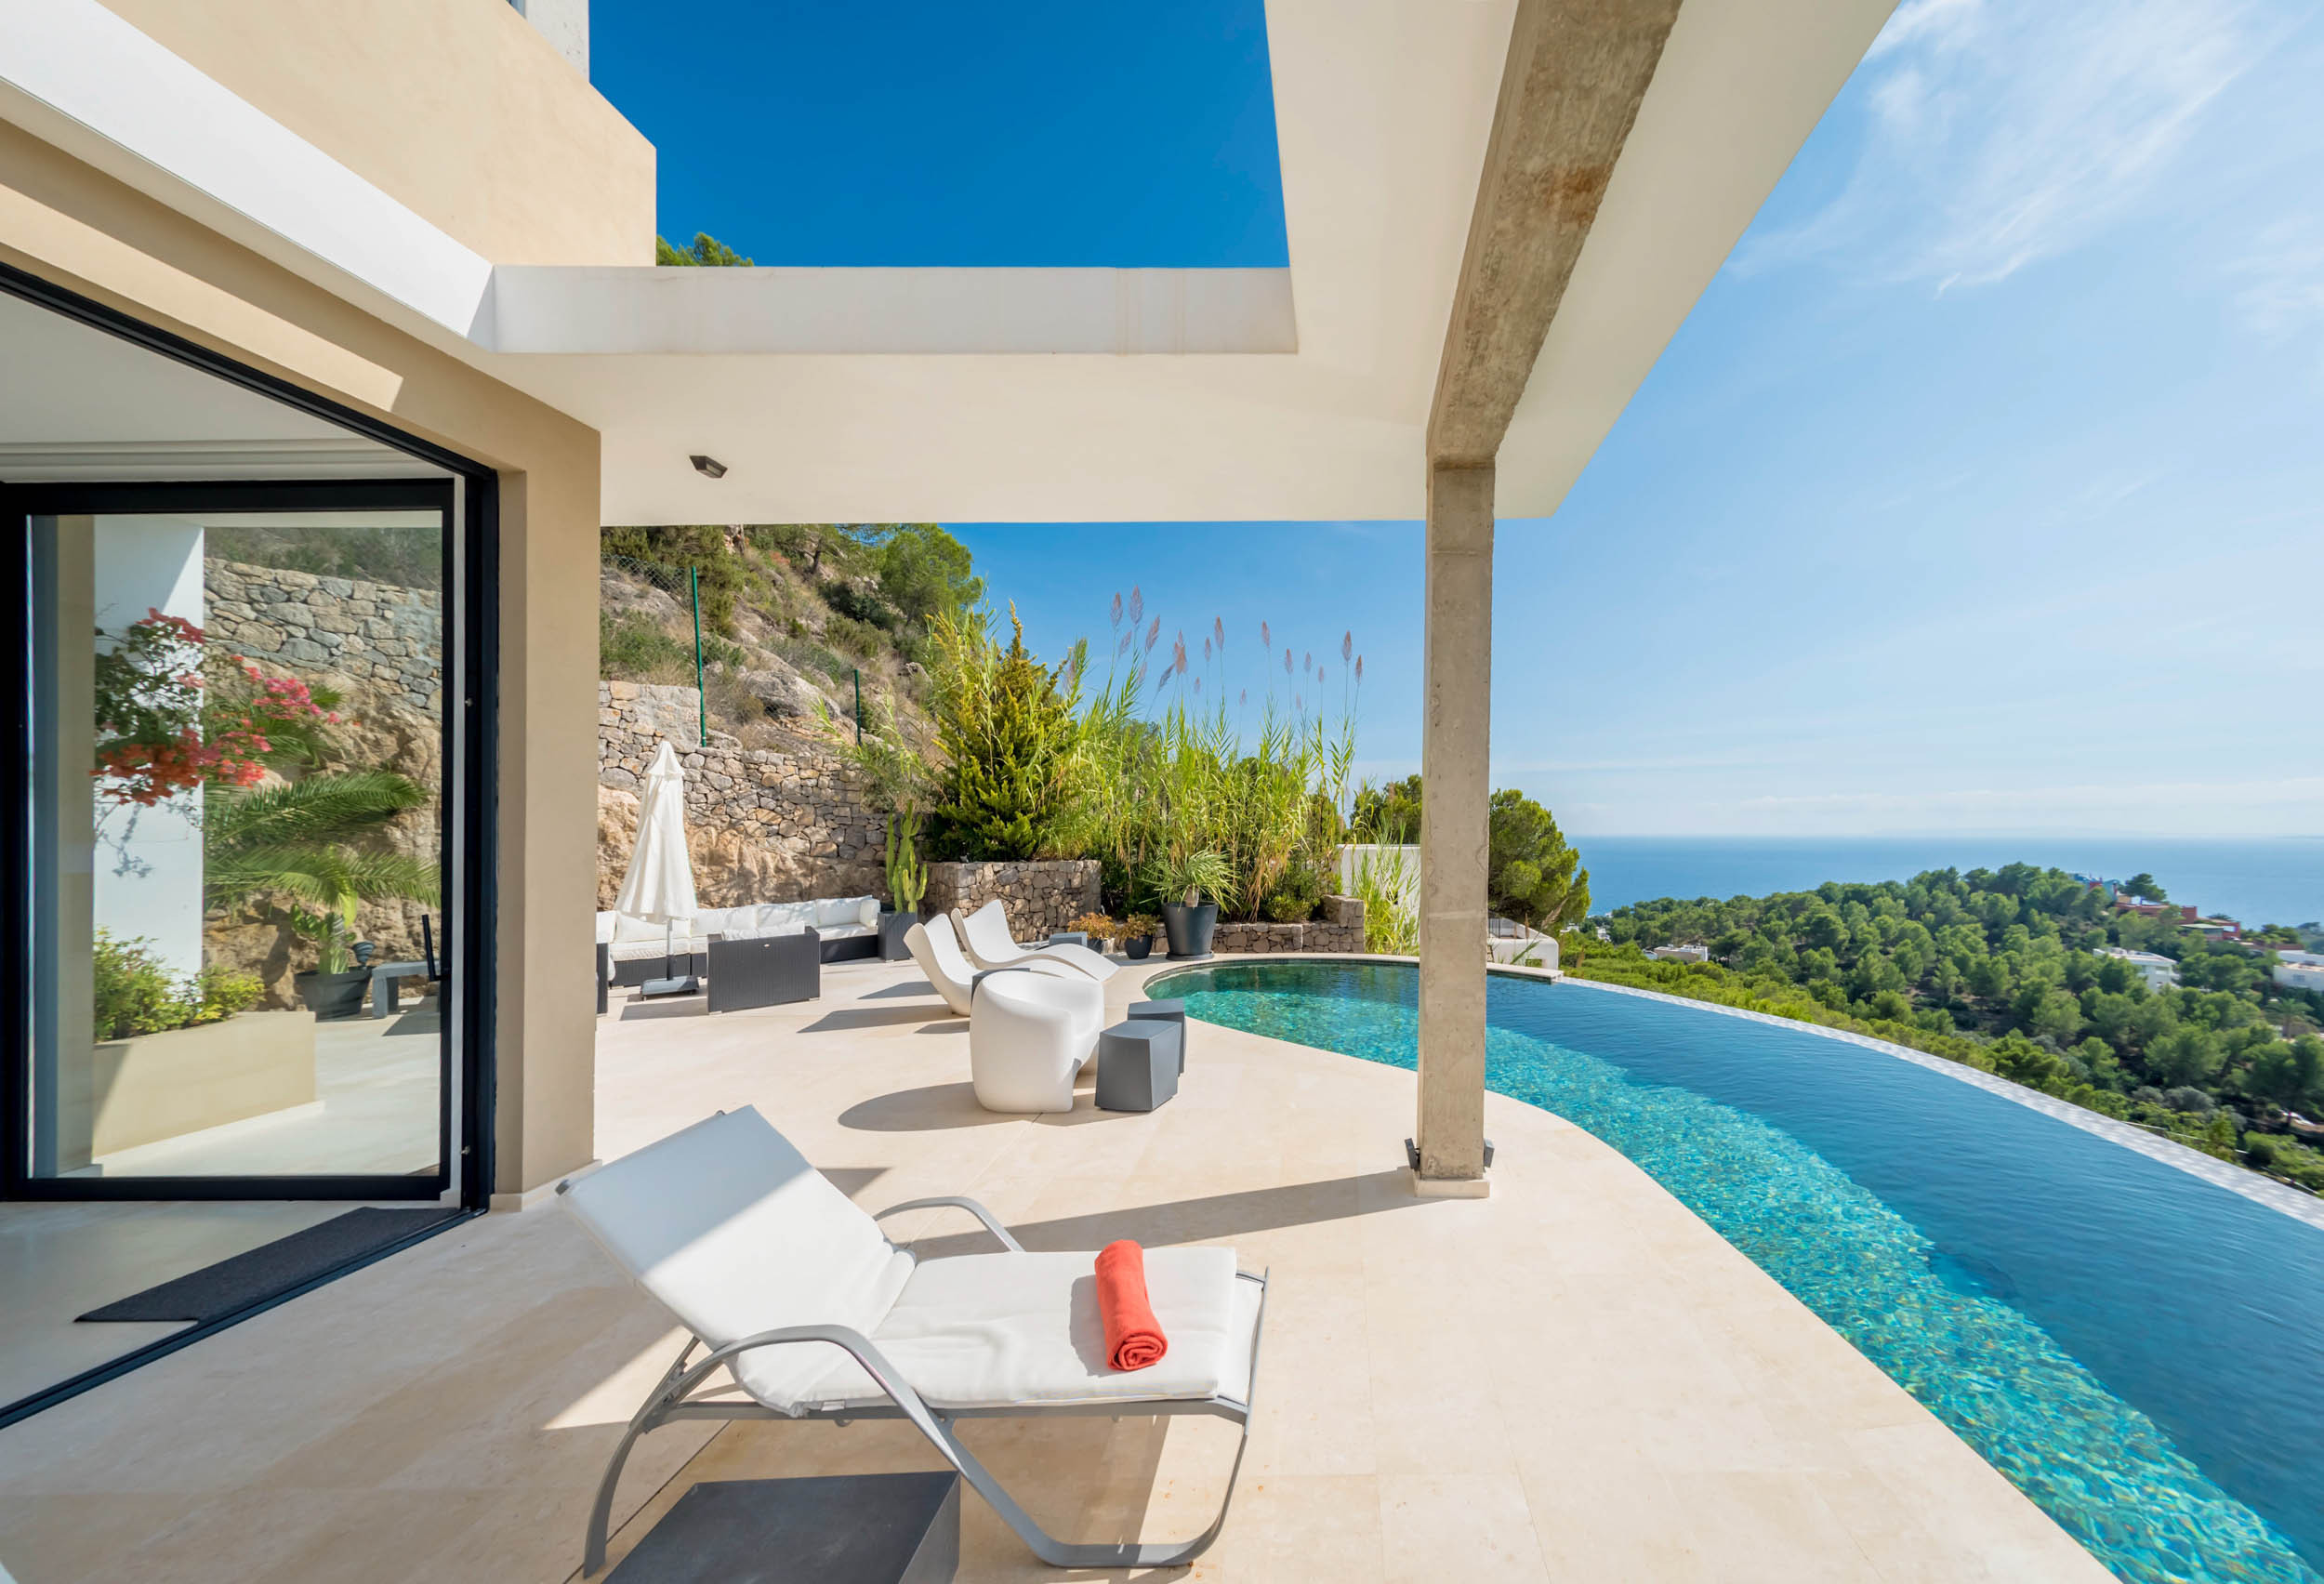 The swimming pool of the Hilltop Villa overlooks the beaches of Ibiza.